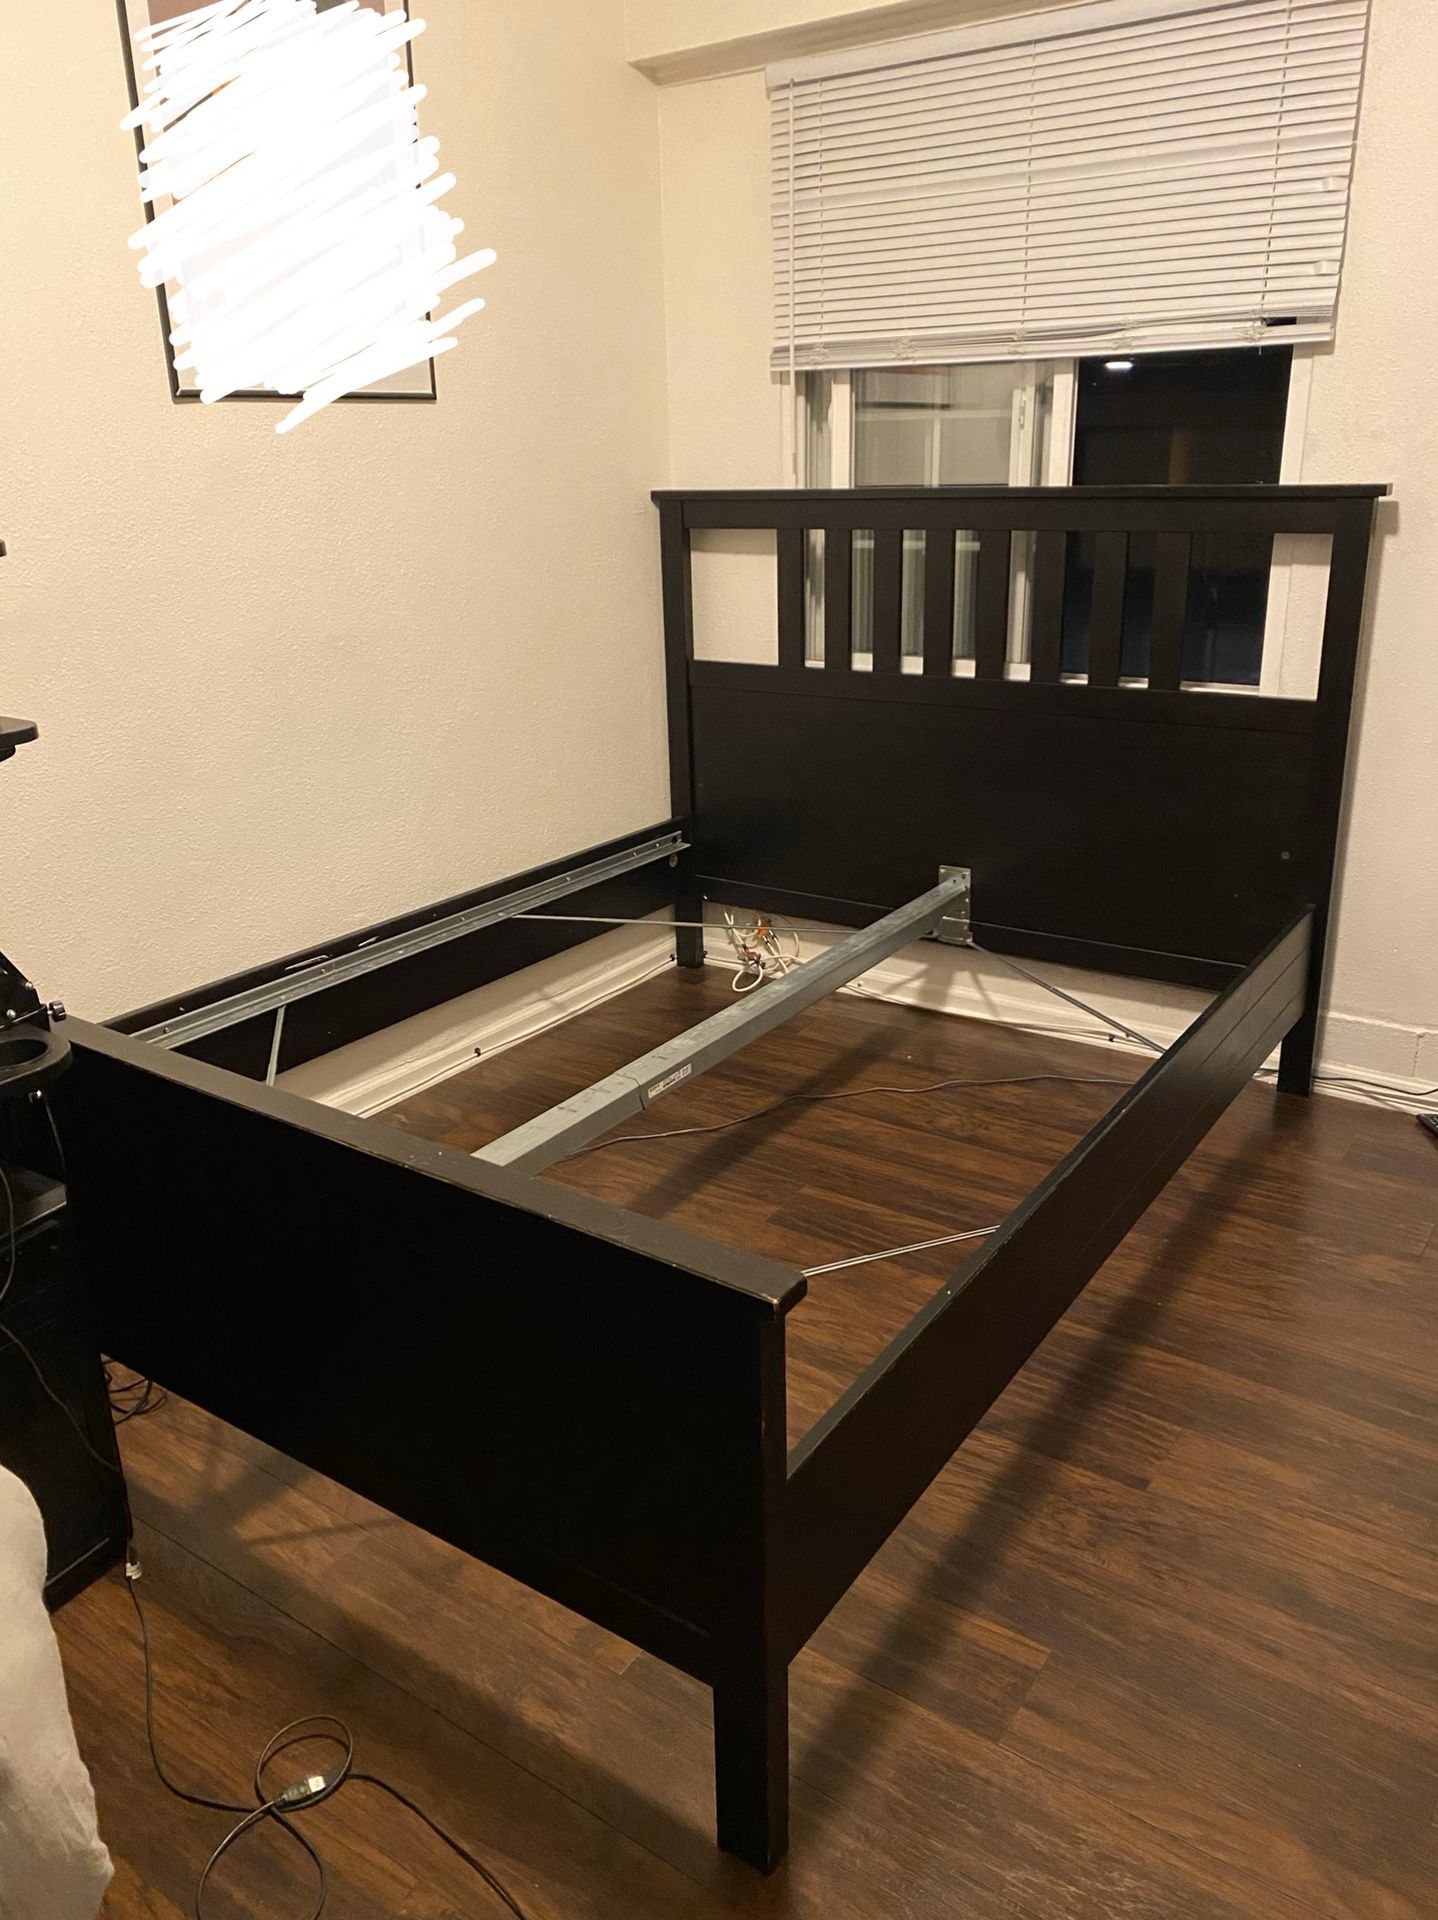 Queen Bed Frame & Slats (FREE)